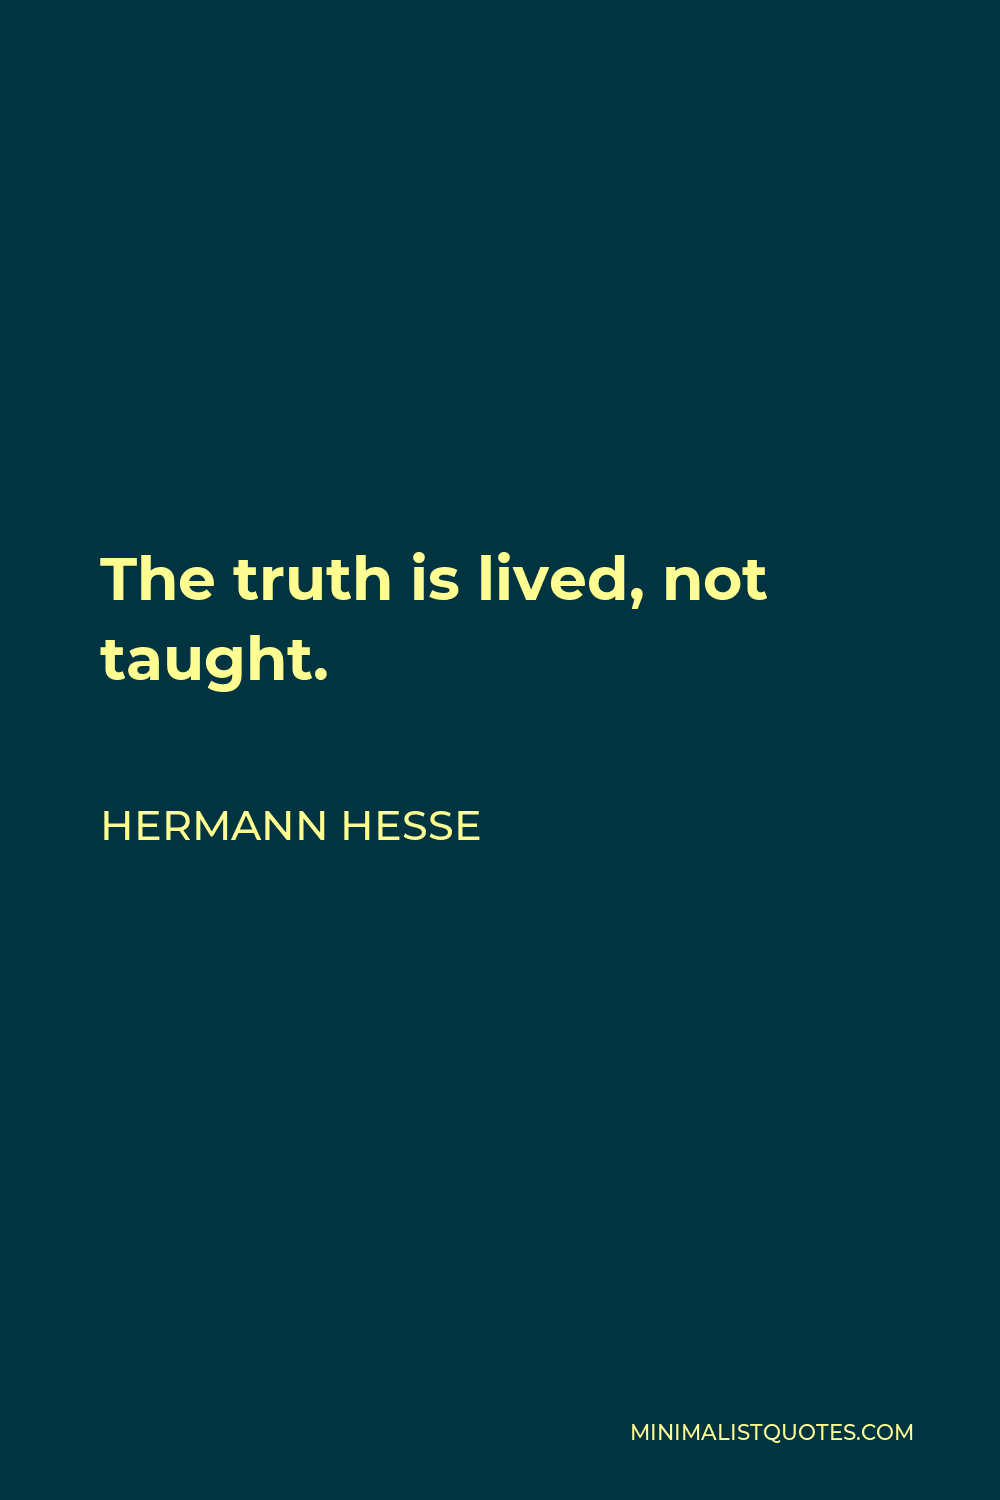 Hermann Hesse Quote - The truth is lived, not taught.